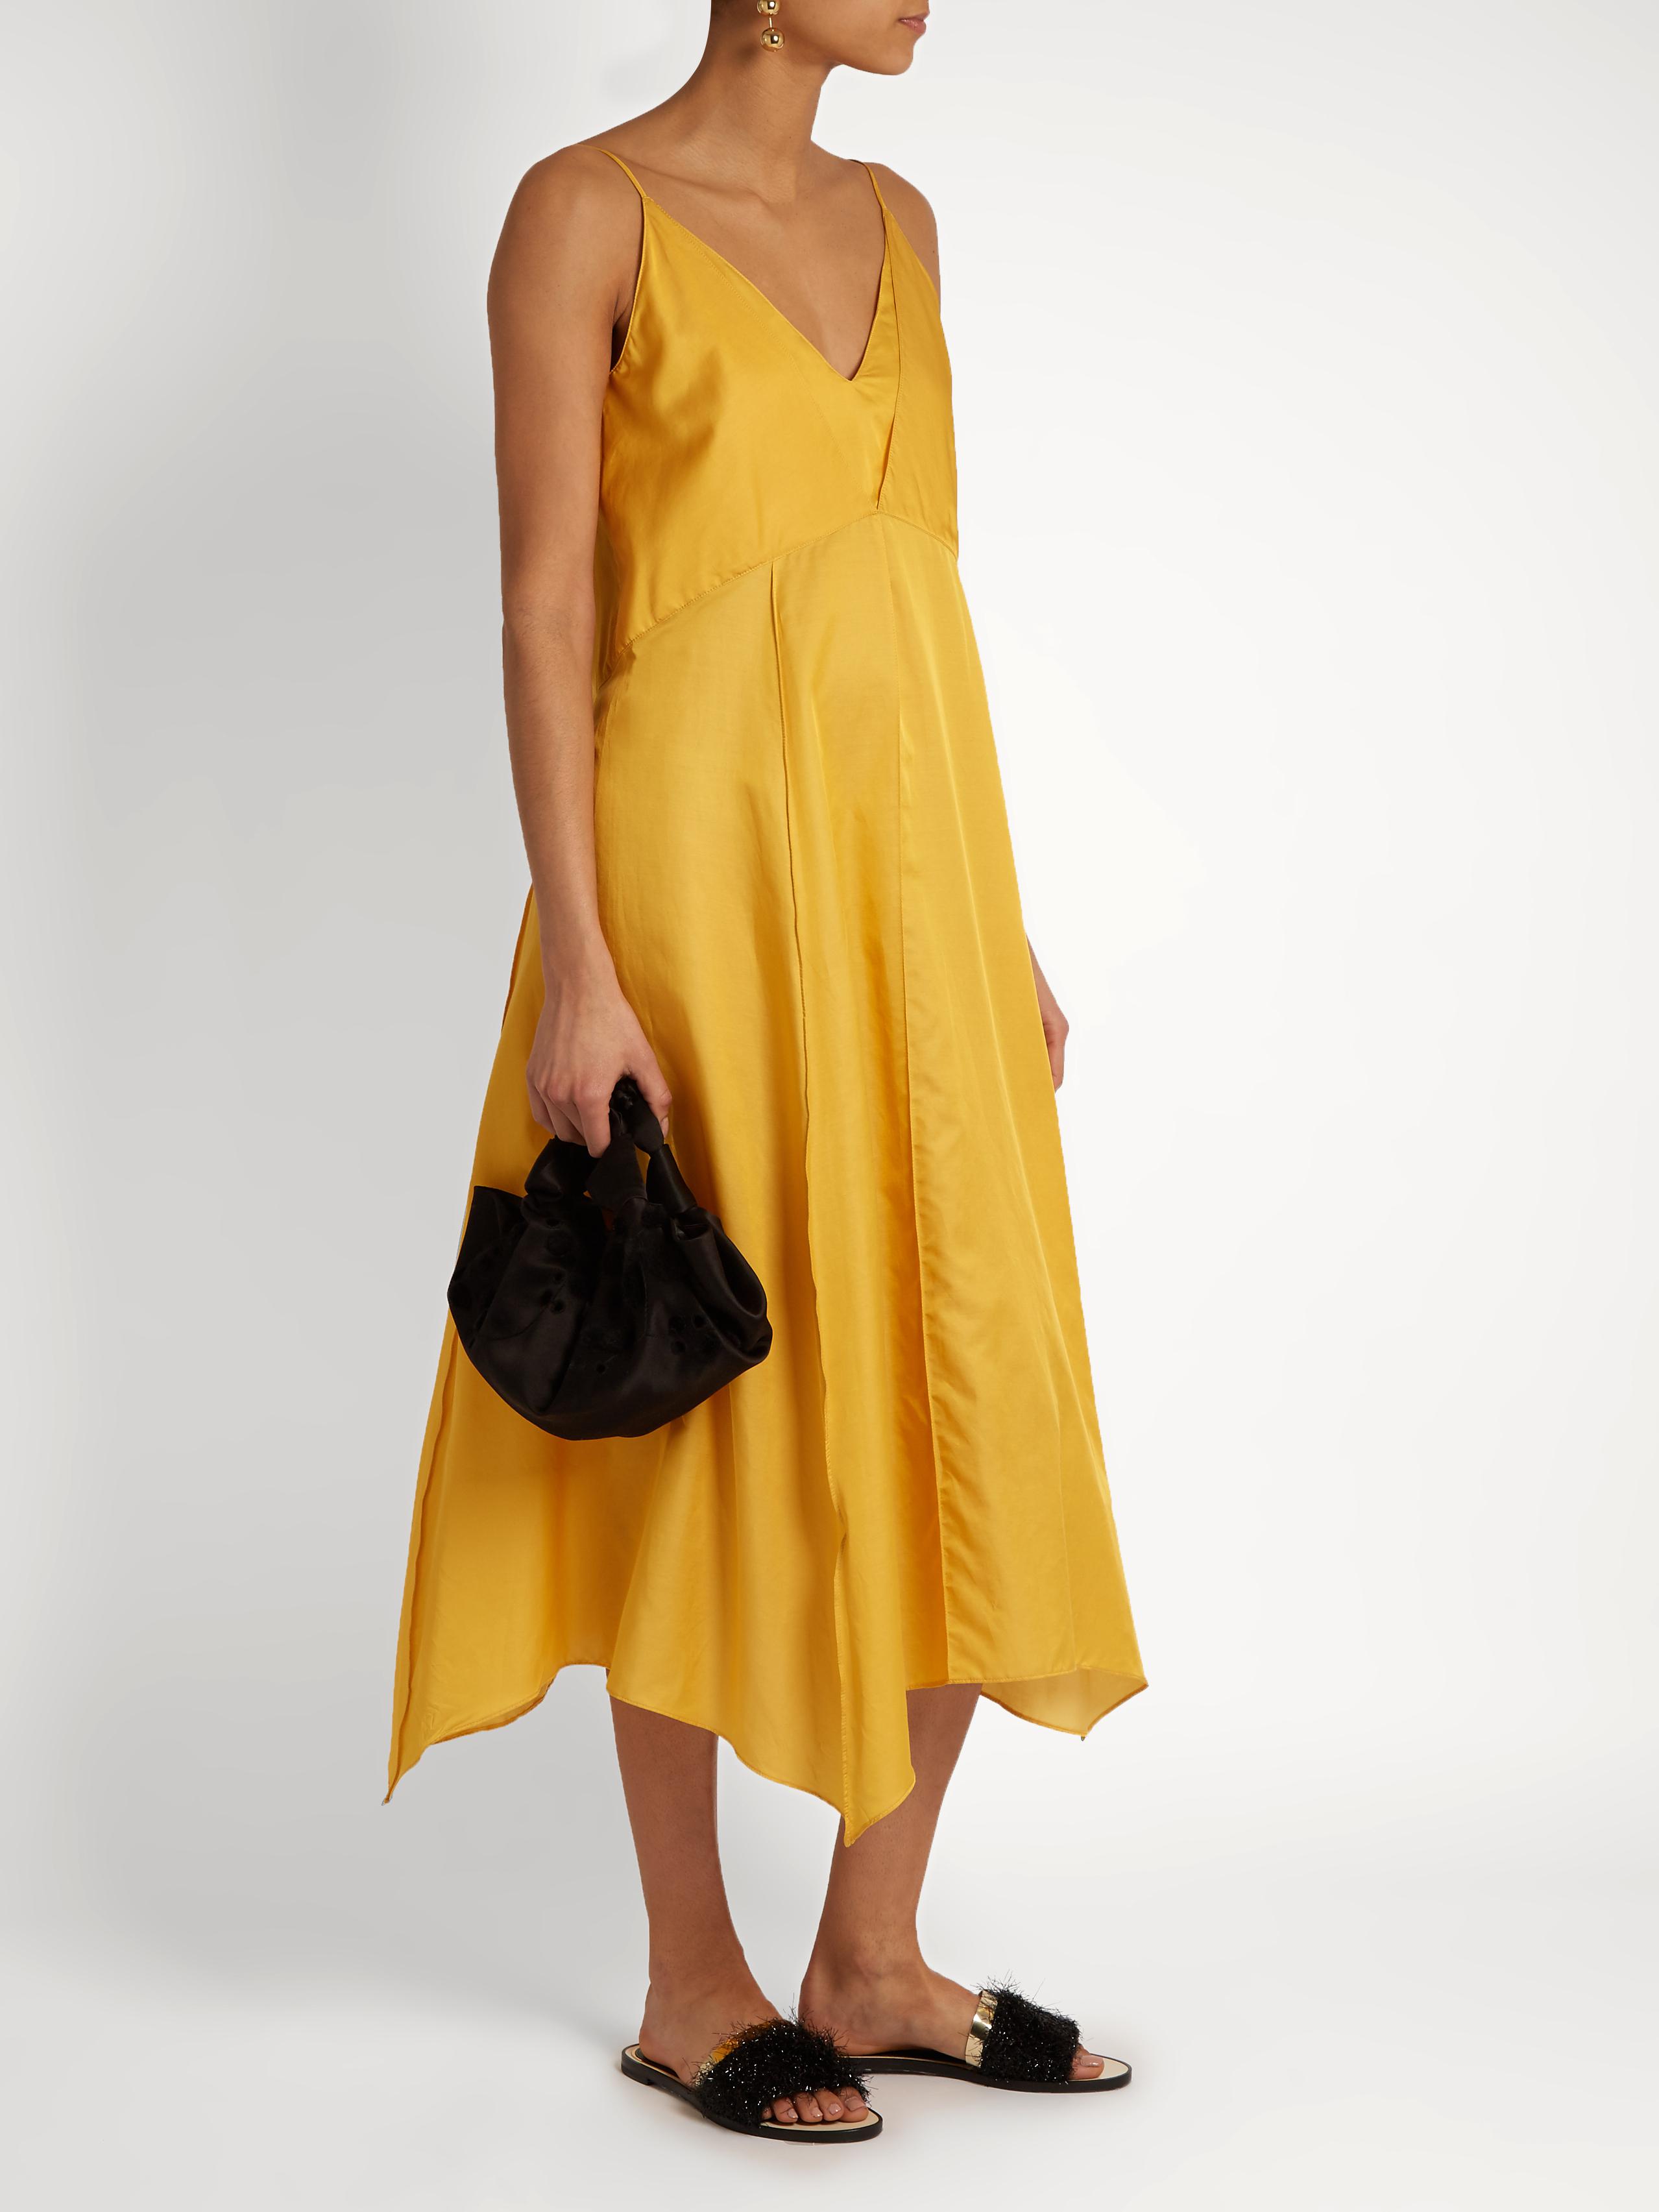 Lyst - Lemaire Cotton And Silk-blend Lingerie Slip Dress in Yellow